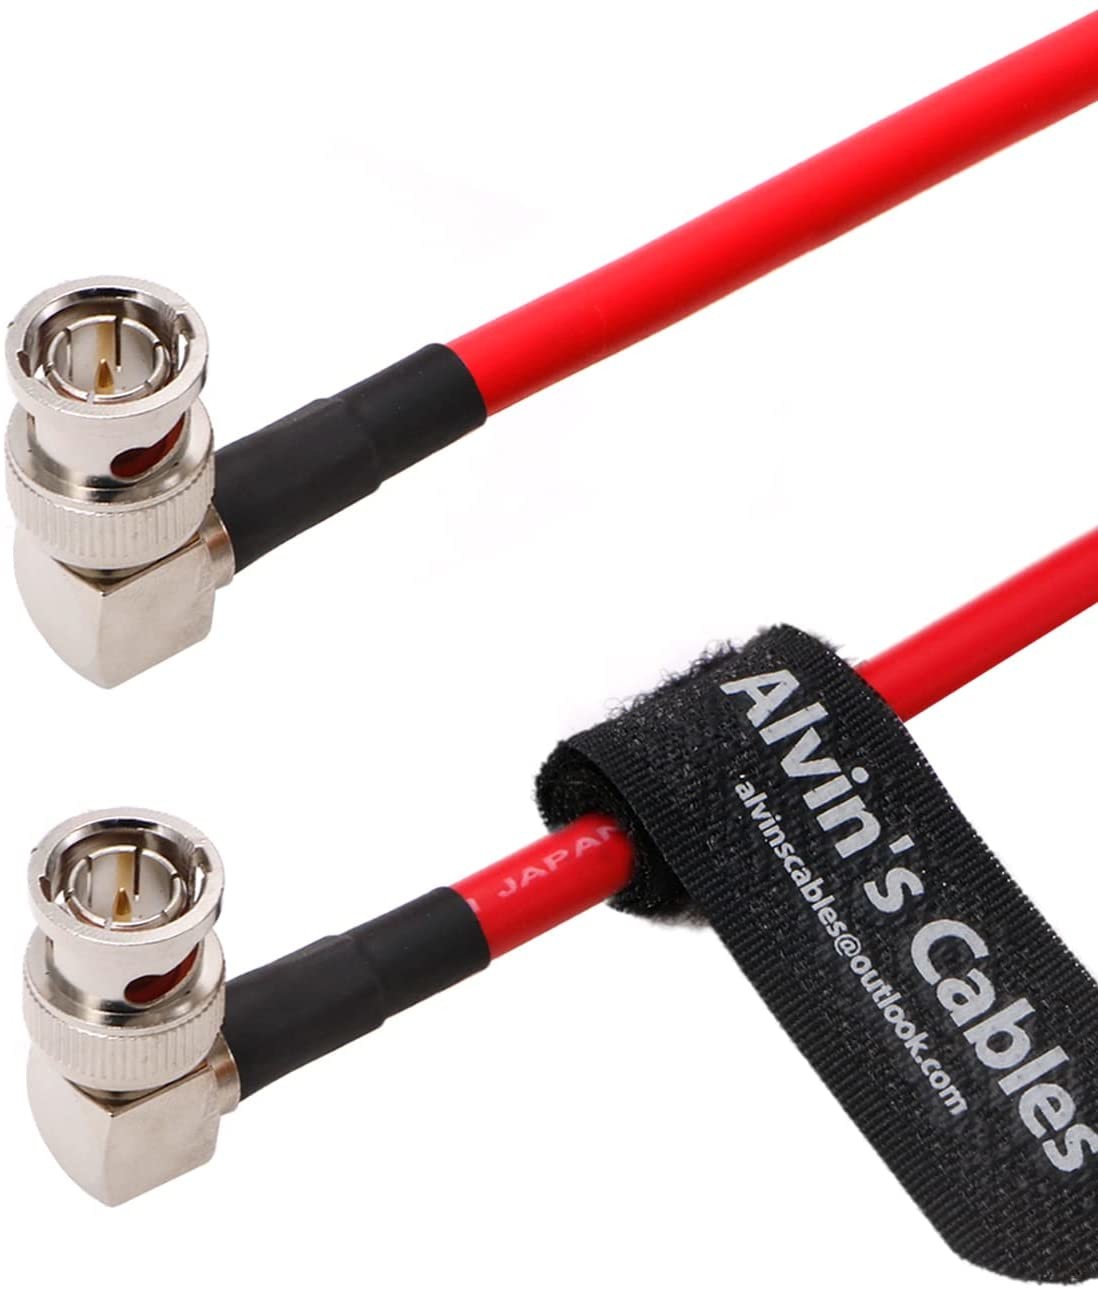 Wholesale 12G BNC-Coaxial-Cable Alvin'S Cables HD SDI BNC Male To Male L-Shaped Original Cable For 4K Video Camera 1M Red from china suppliers